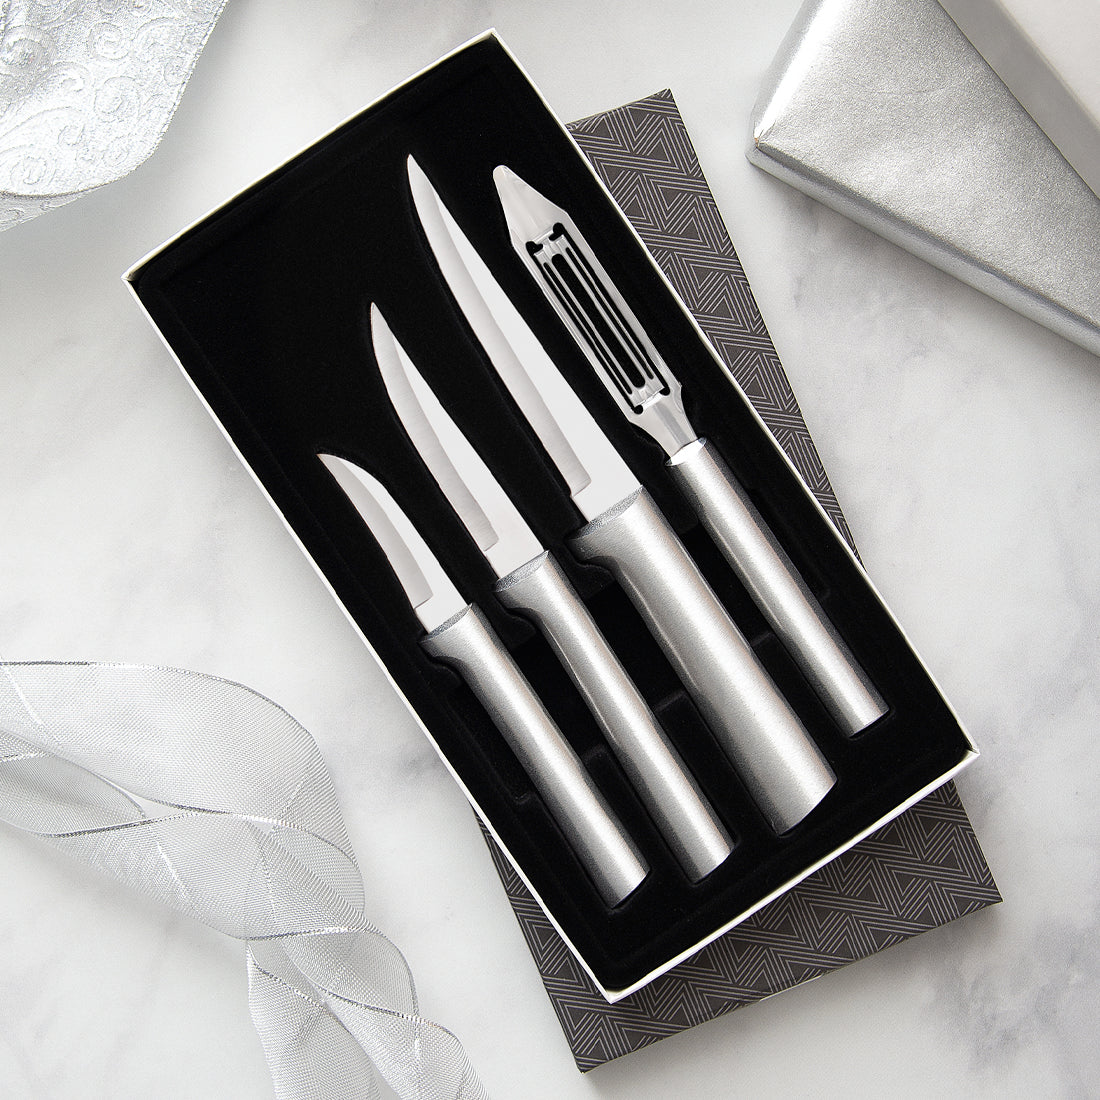 Meal Prep Gift Set with silver handles with three knives and vegetable peeler in gift box. 